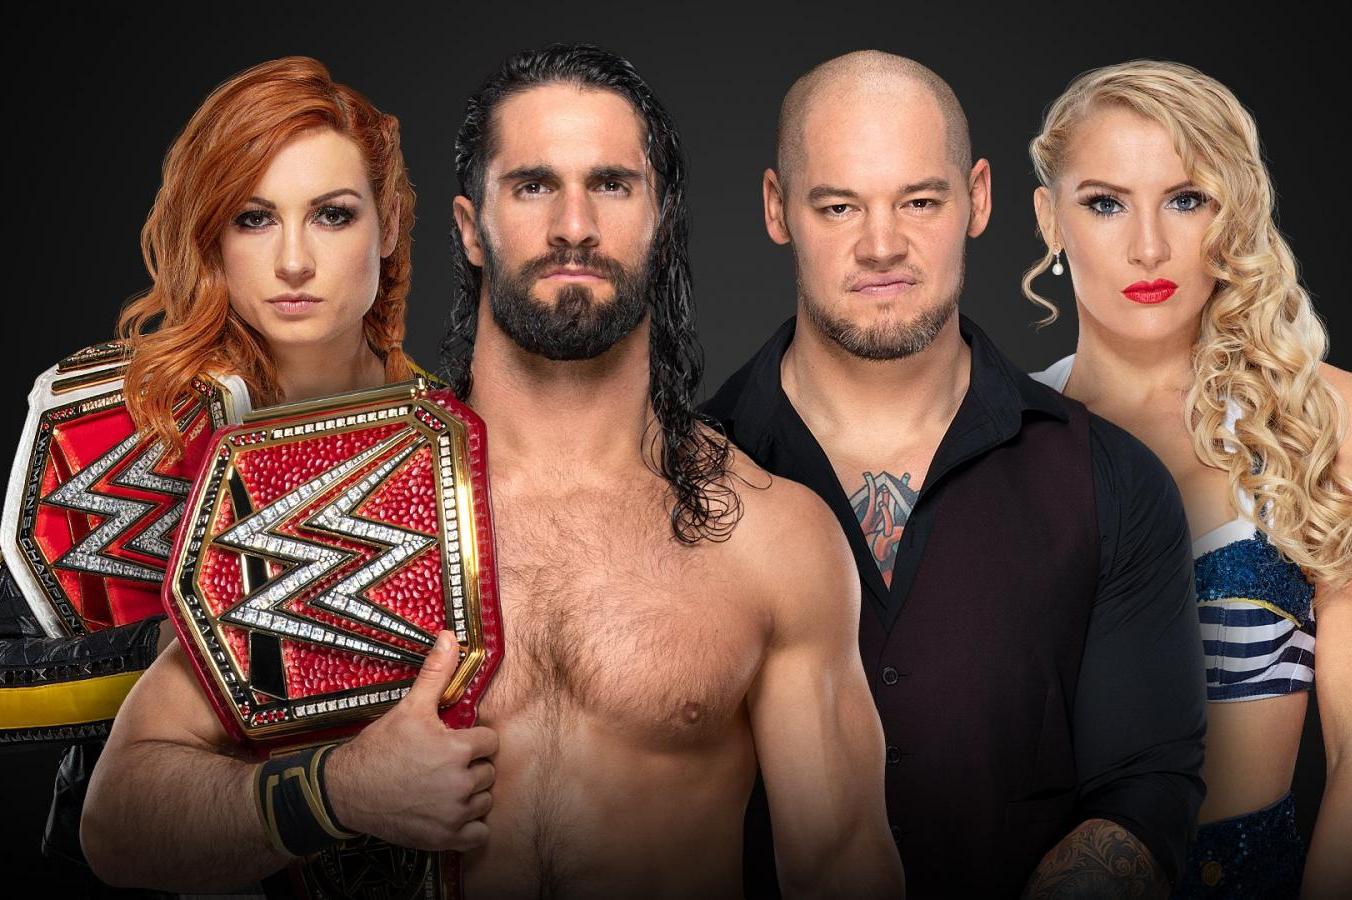 Seth Rollins, Becky Lynch Beat Baron Corbin, Lacey Evans at WWE